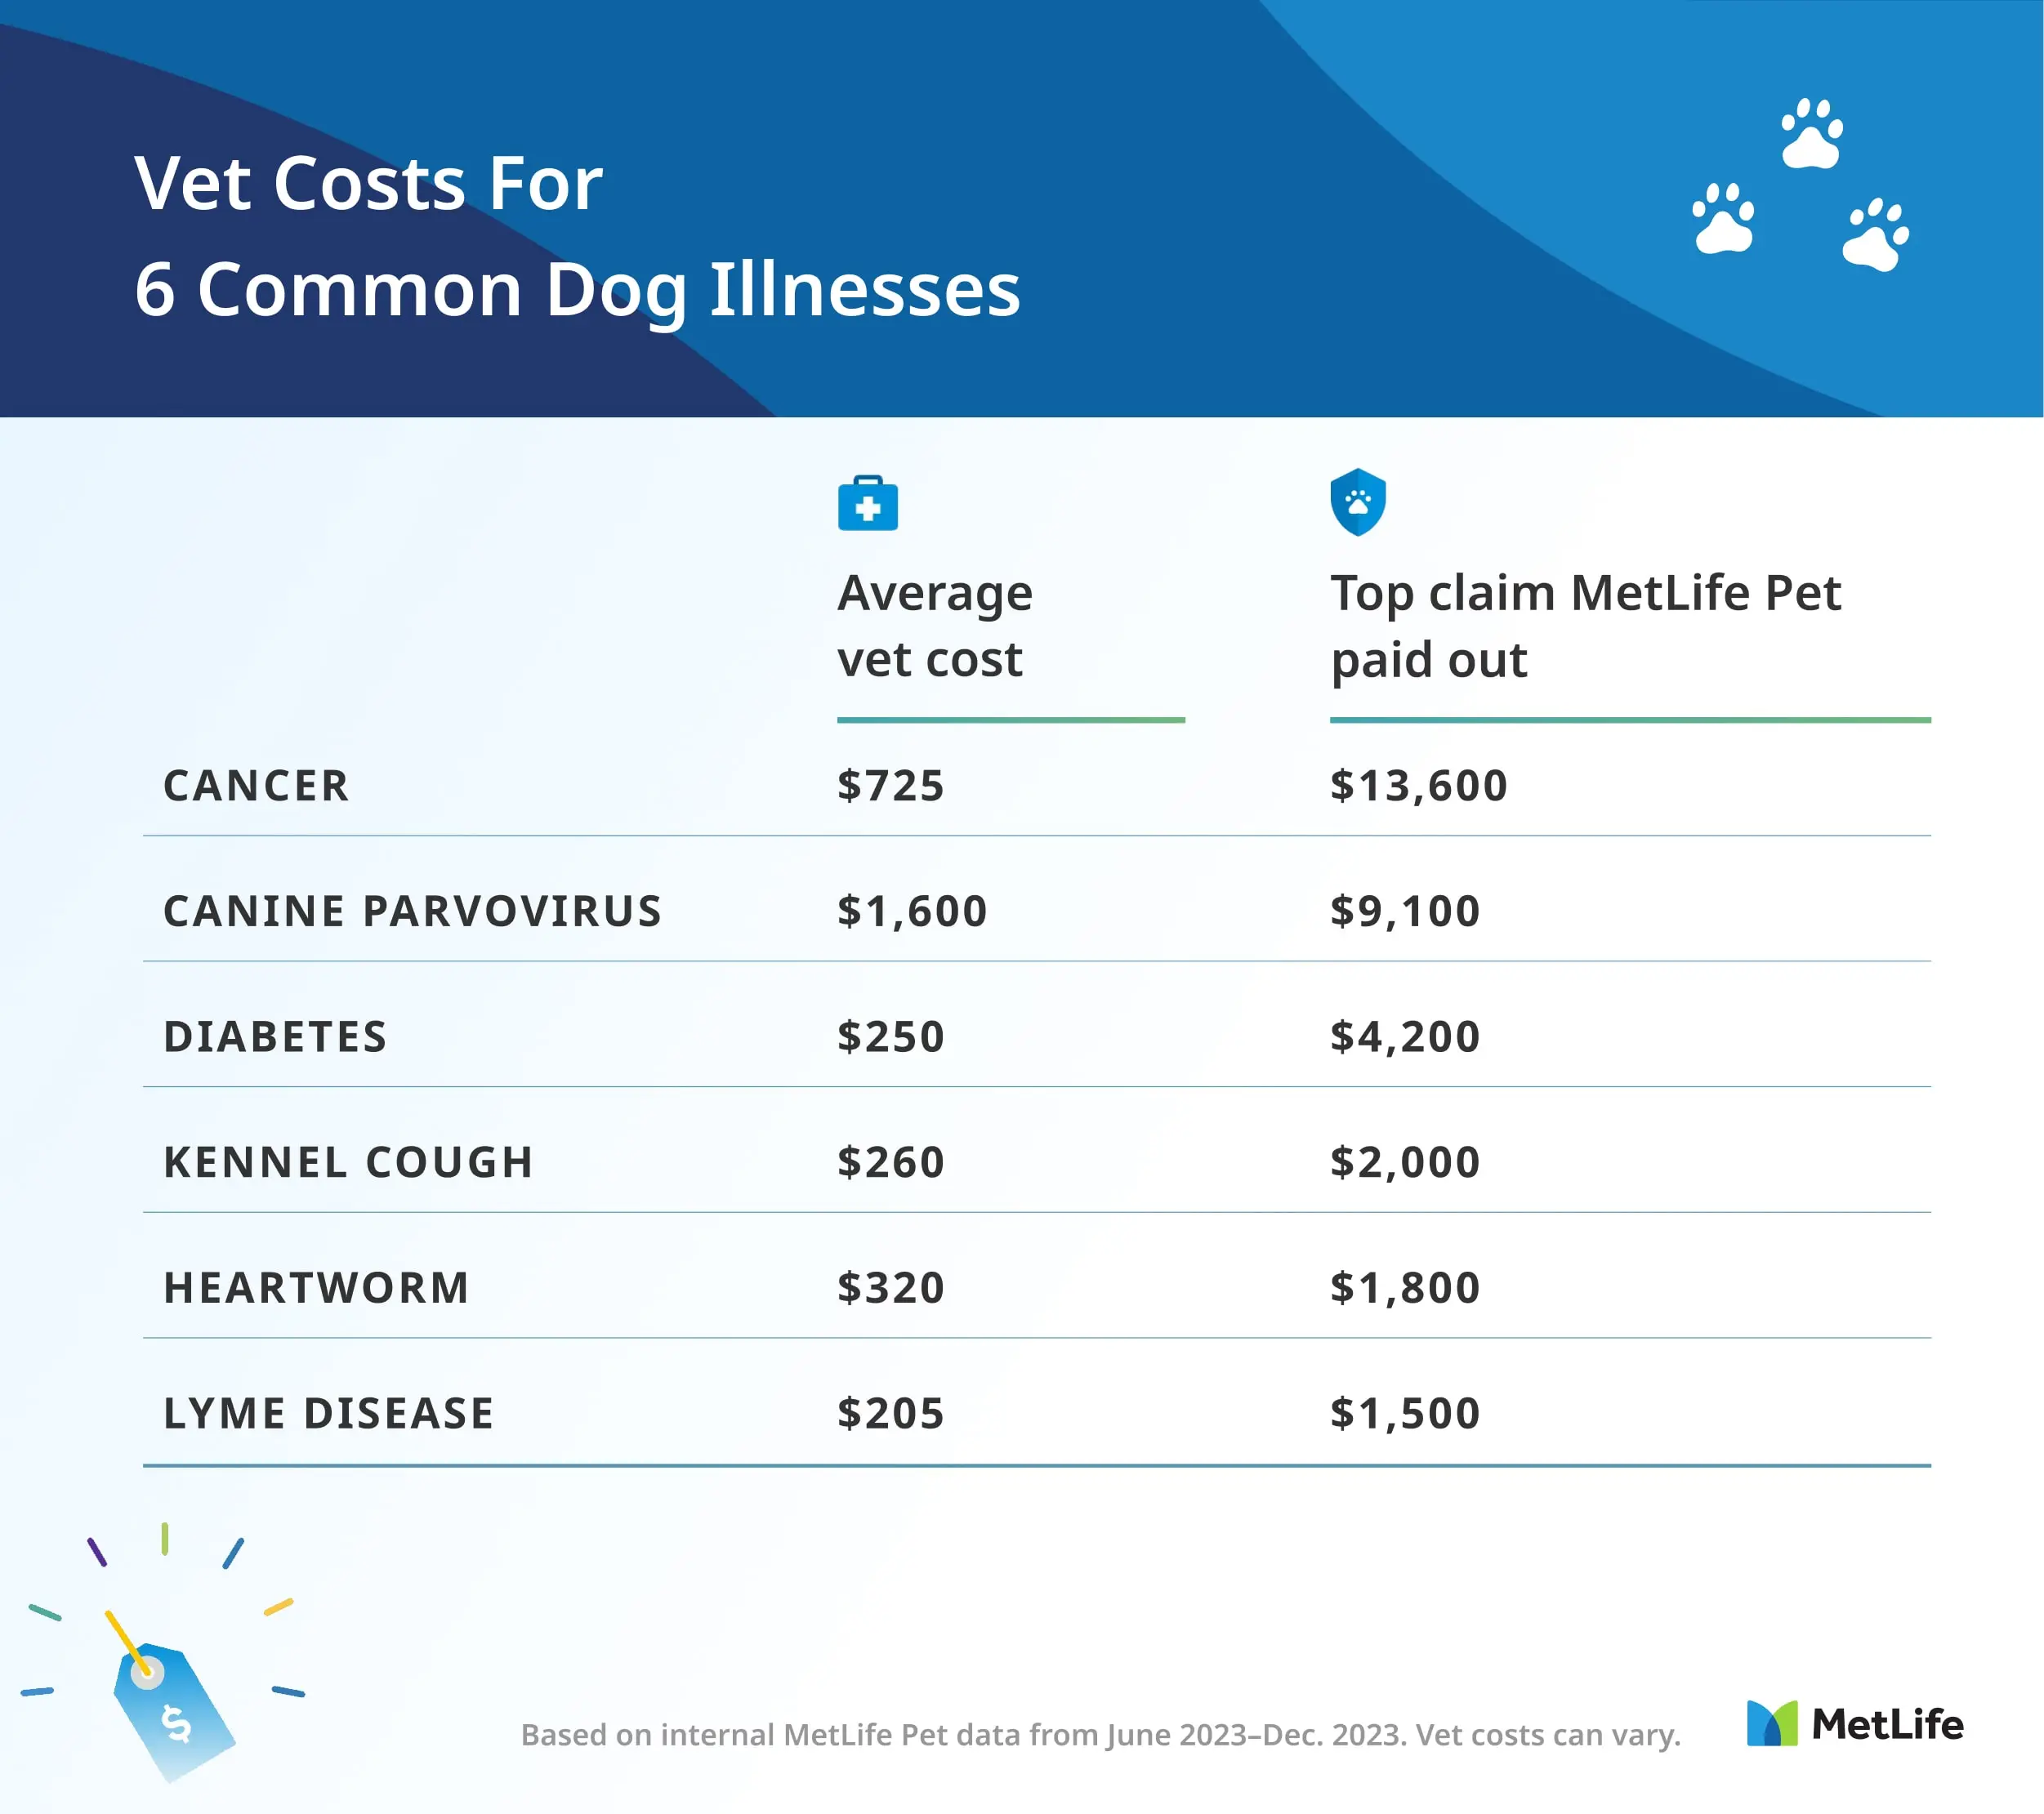 Cancer: $725; top cancer claim MetLife Pet paid out: $13,600. Diabetes: $250; top diabetes claim paid out: $4,200. Kennel cough: $260; top kennel cough claim paid out: $2,000. Parvovirus: $1,600; top parvo claim paid out: $9,100; Lyme disease: $205; top Lyme claim paid out: $1,500. Heartworm: $320; top heartworm claim paid out: $1,800 